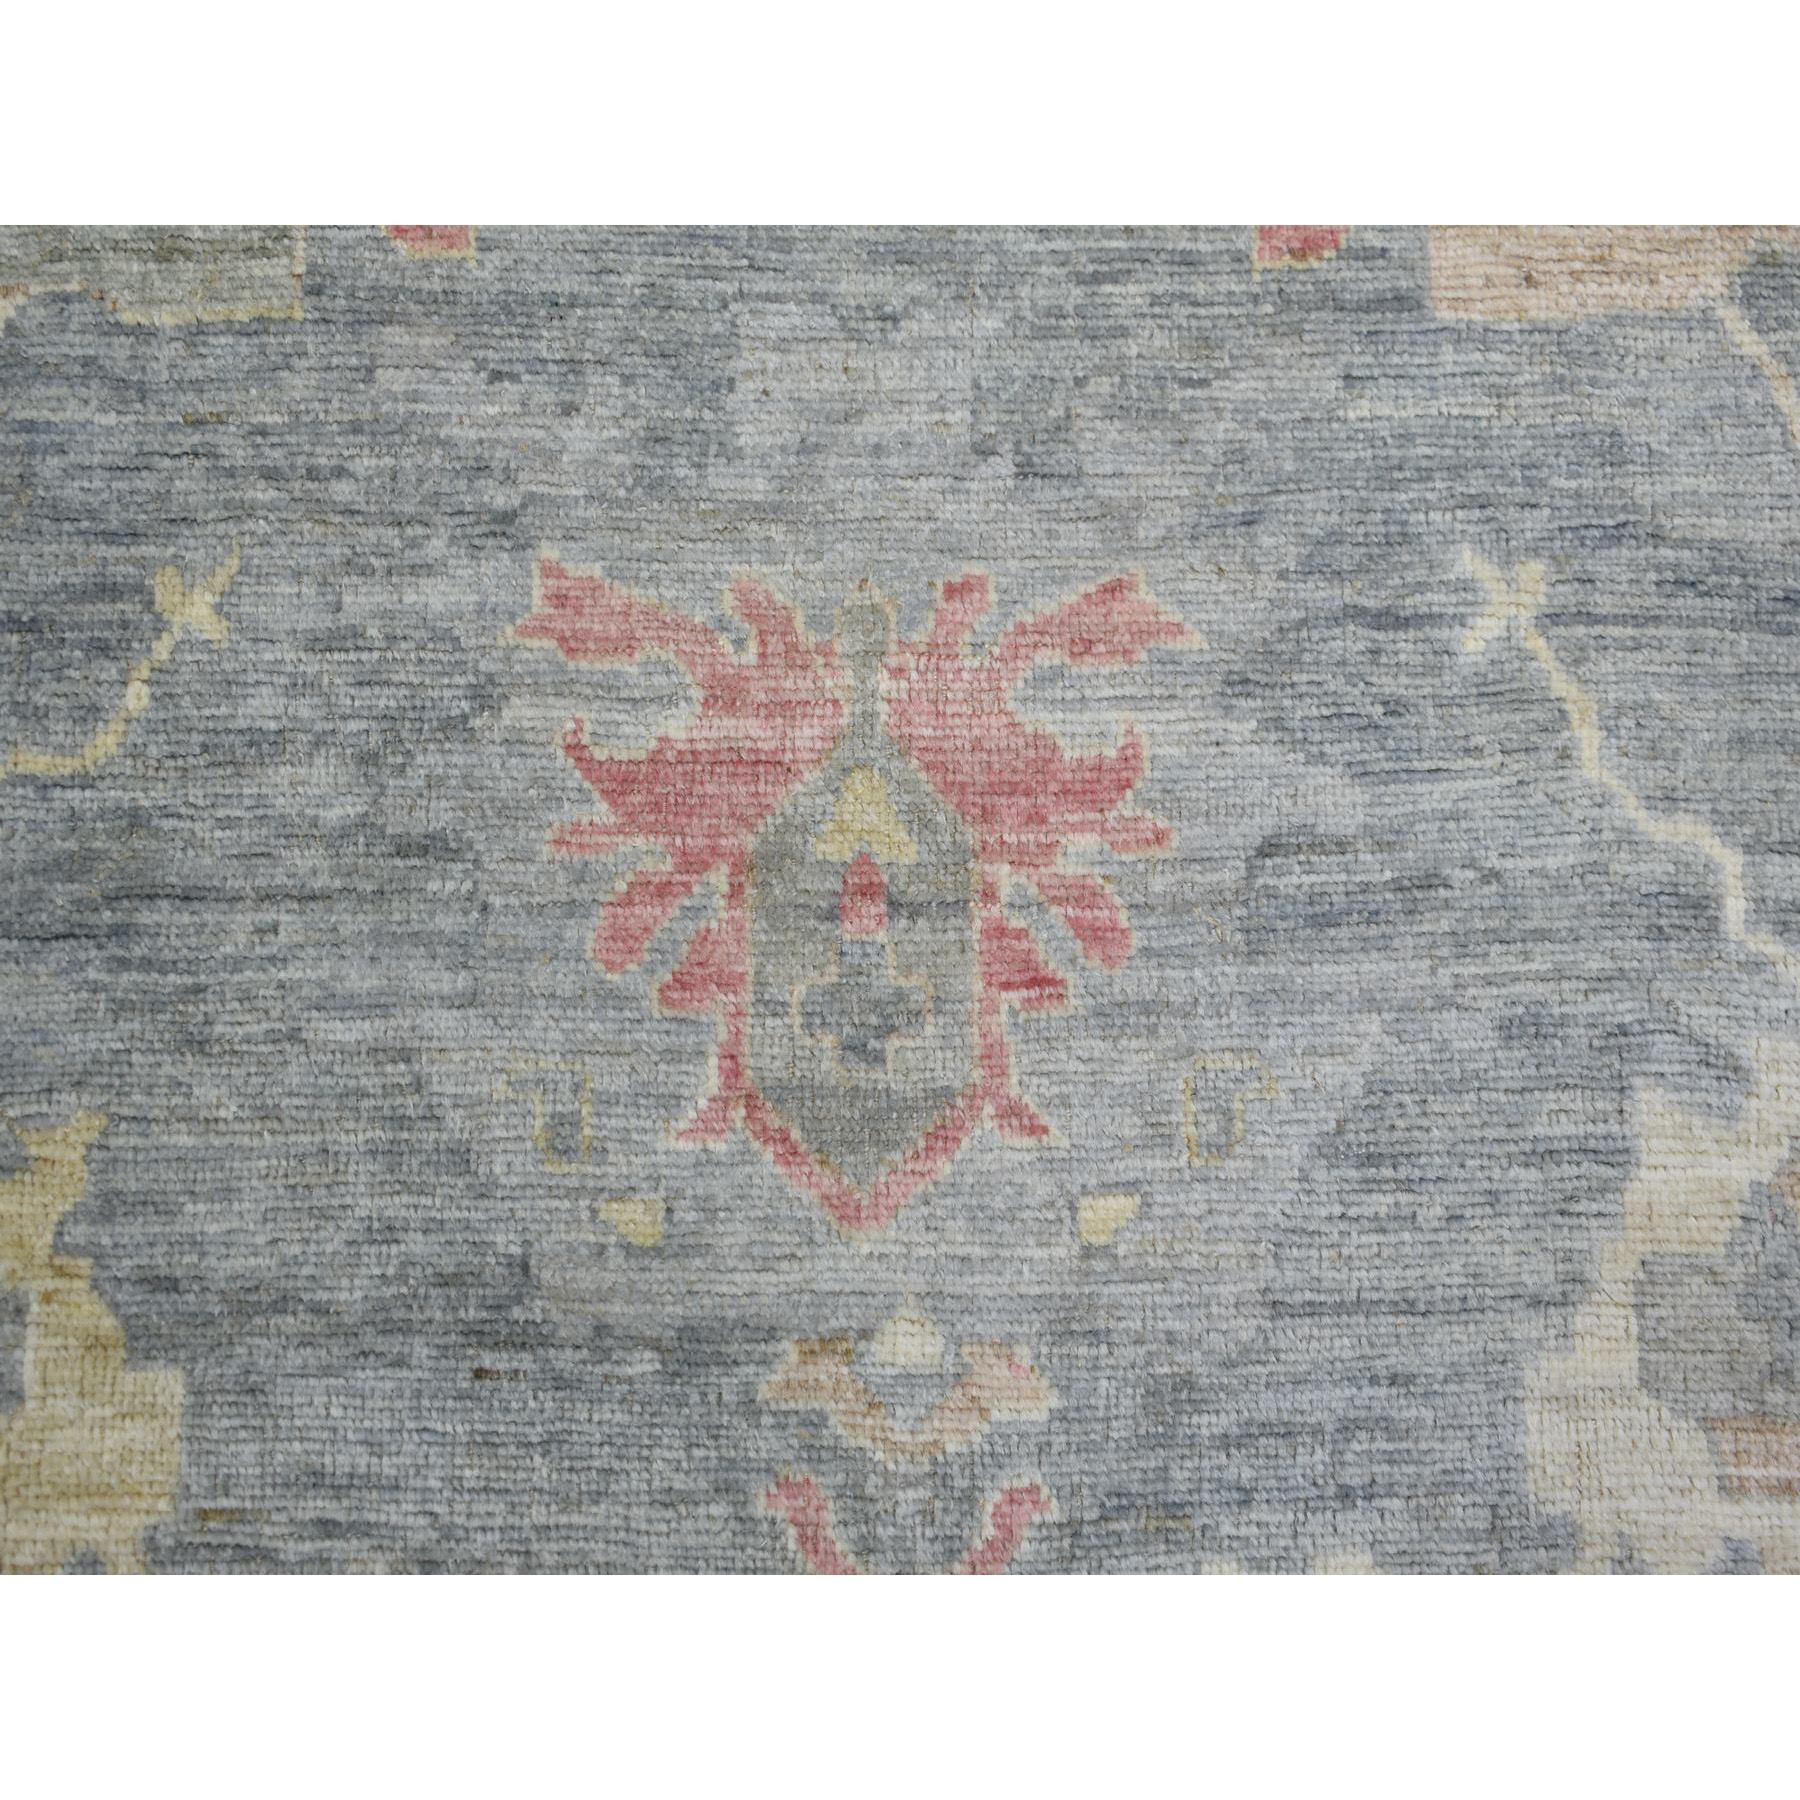 8'x9'8" Gray Angora Oushak Soft Colors With Leaf Design Natural Dyes, Afghan Wool Hand Woven Oriental Rug 